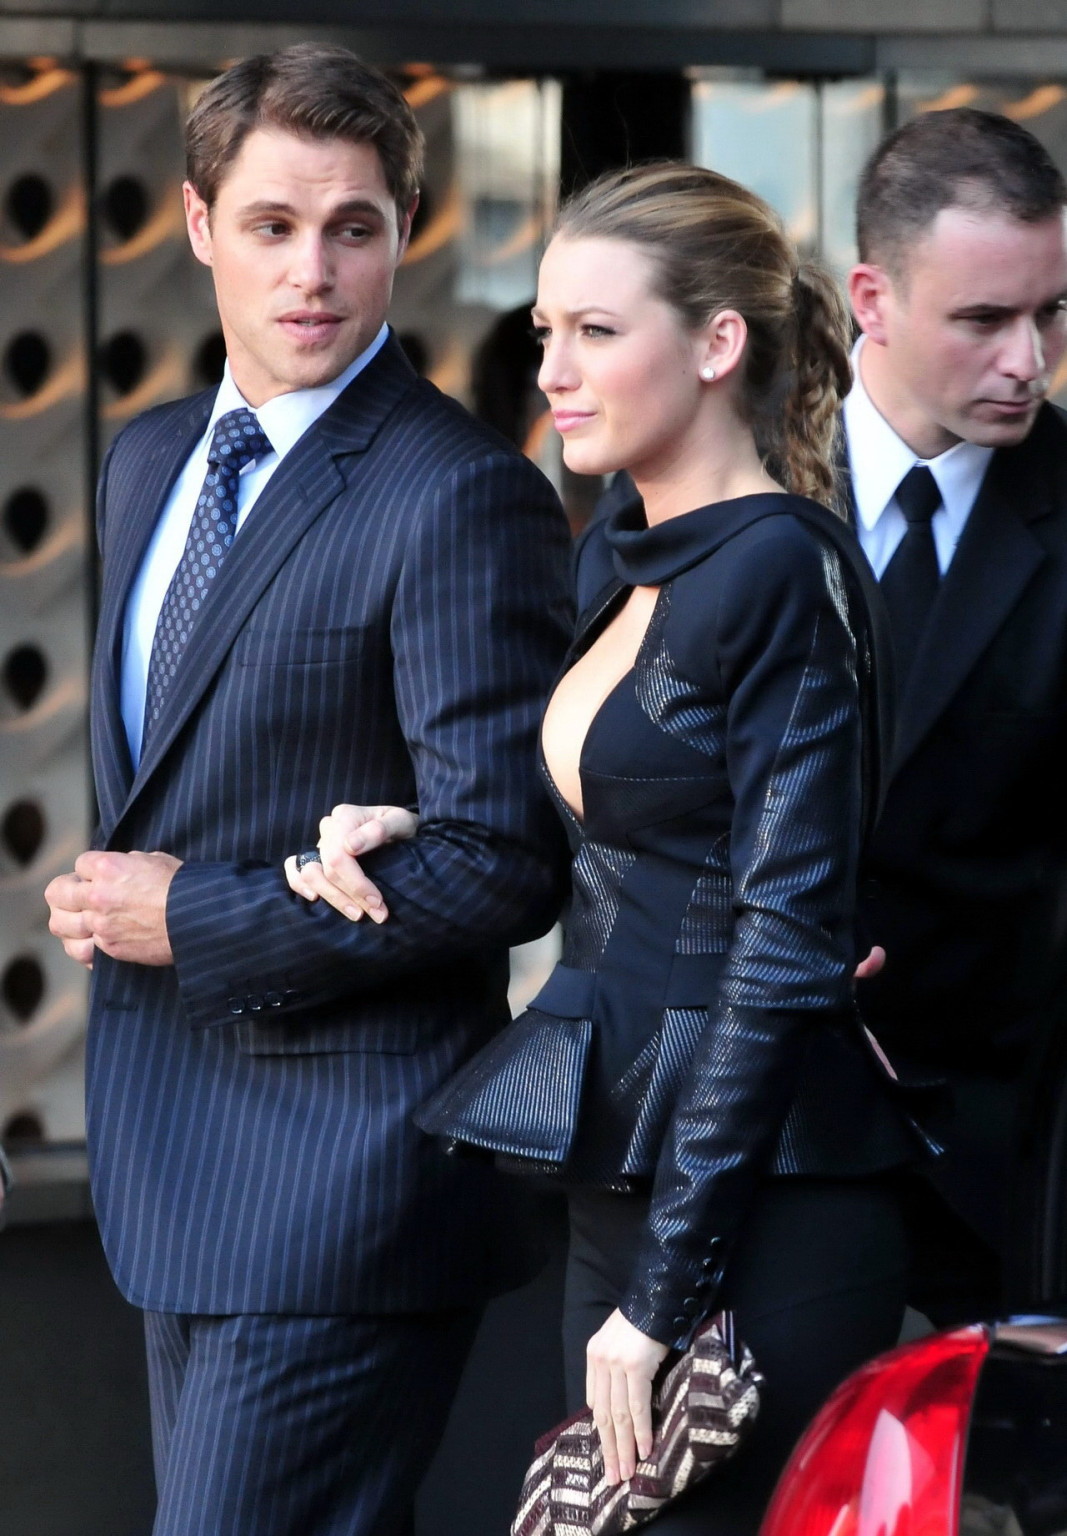 Blake Lively showing cleavage in killer outfit on the 'Gossip Girl' set in NYC #75334724